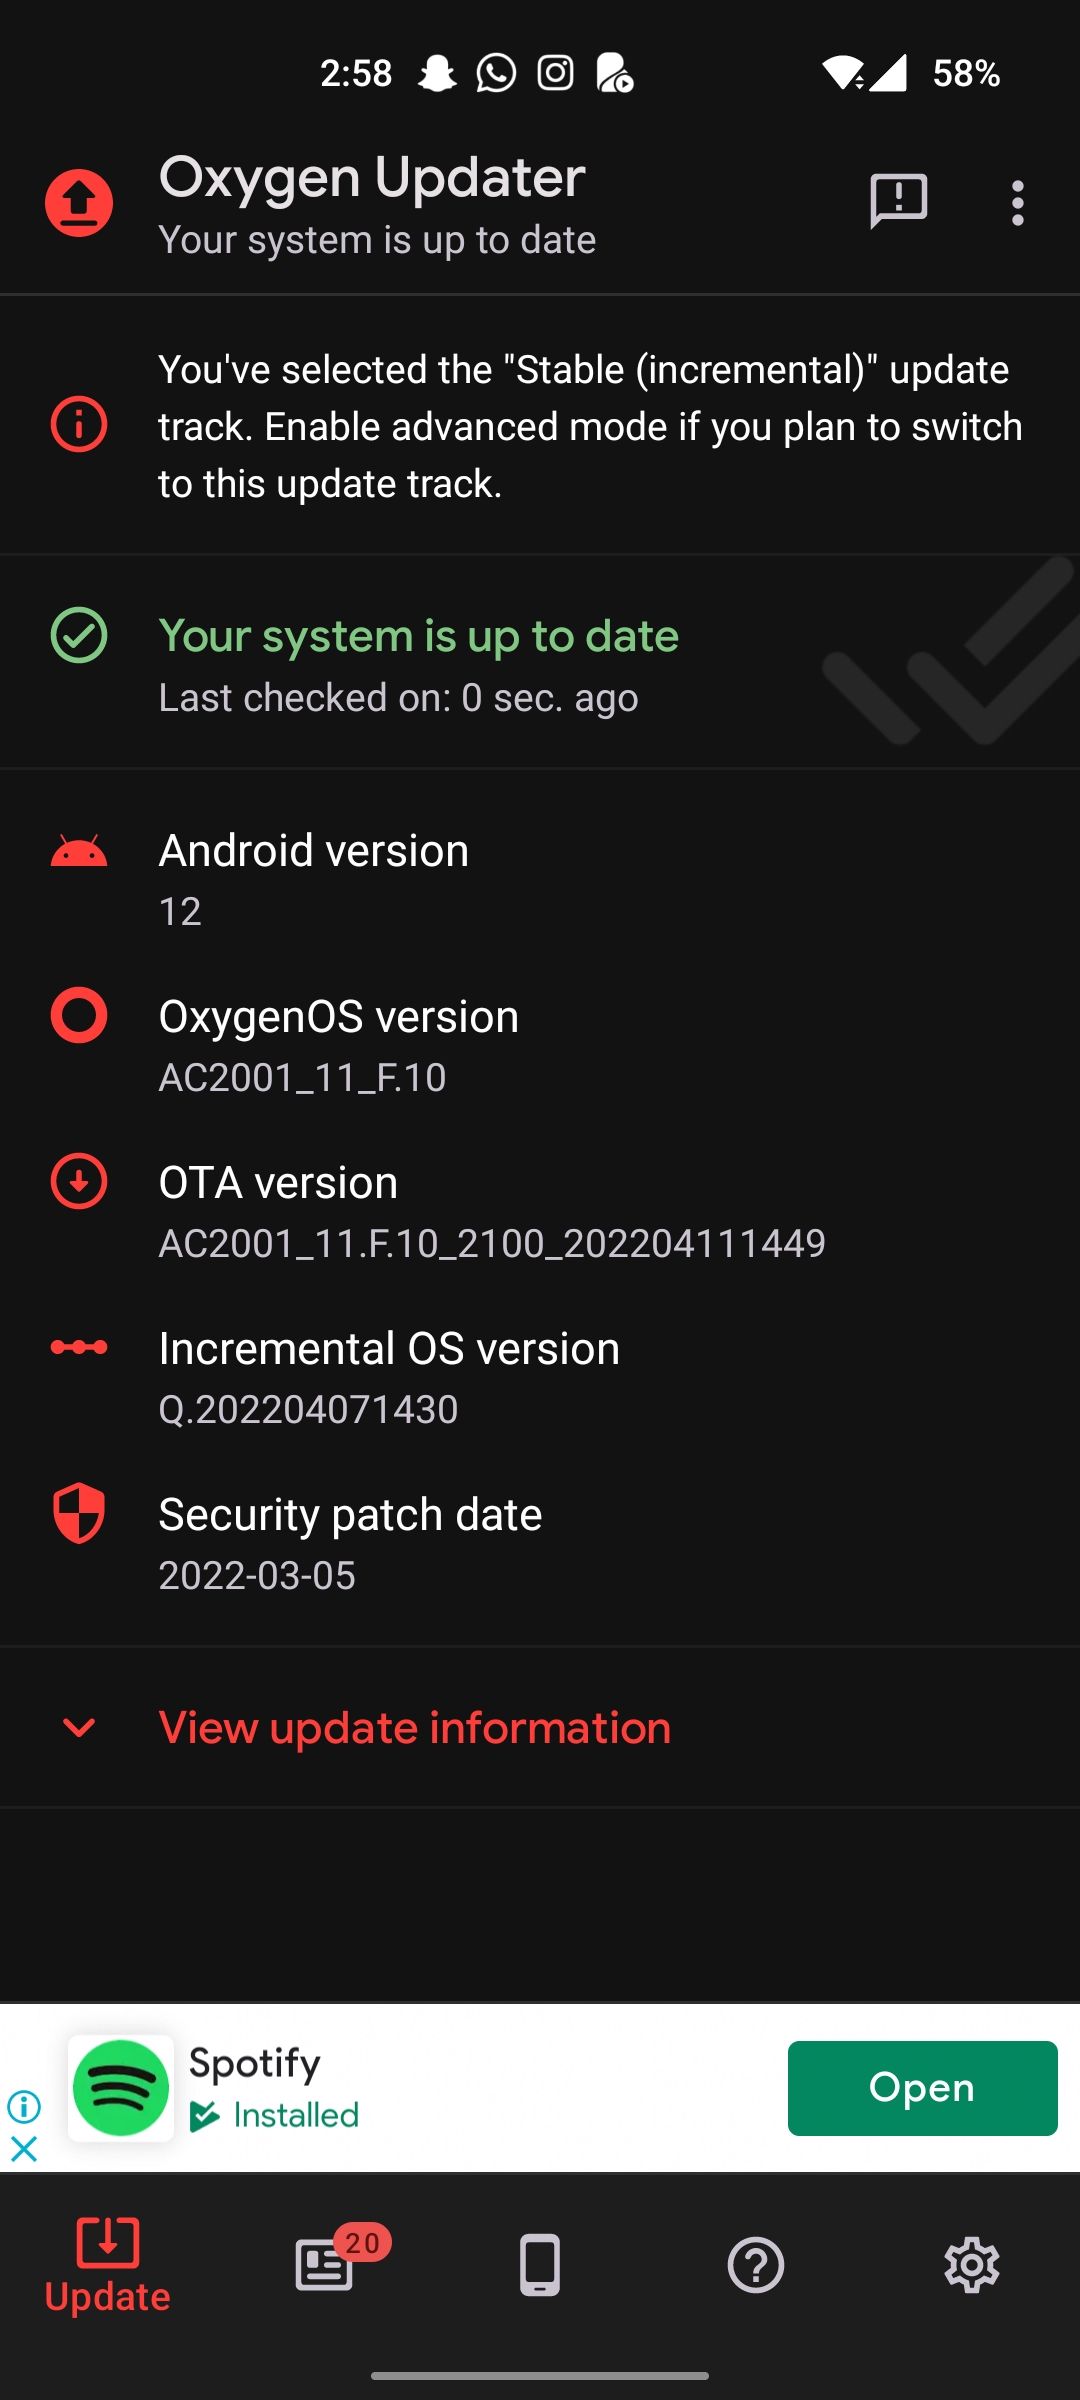 Oxygen Updater displaying system up to date